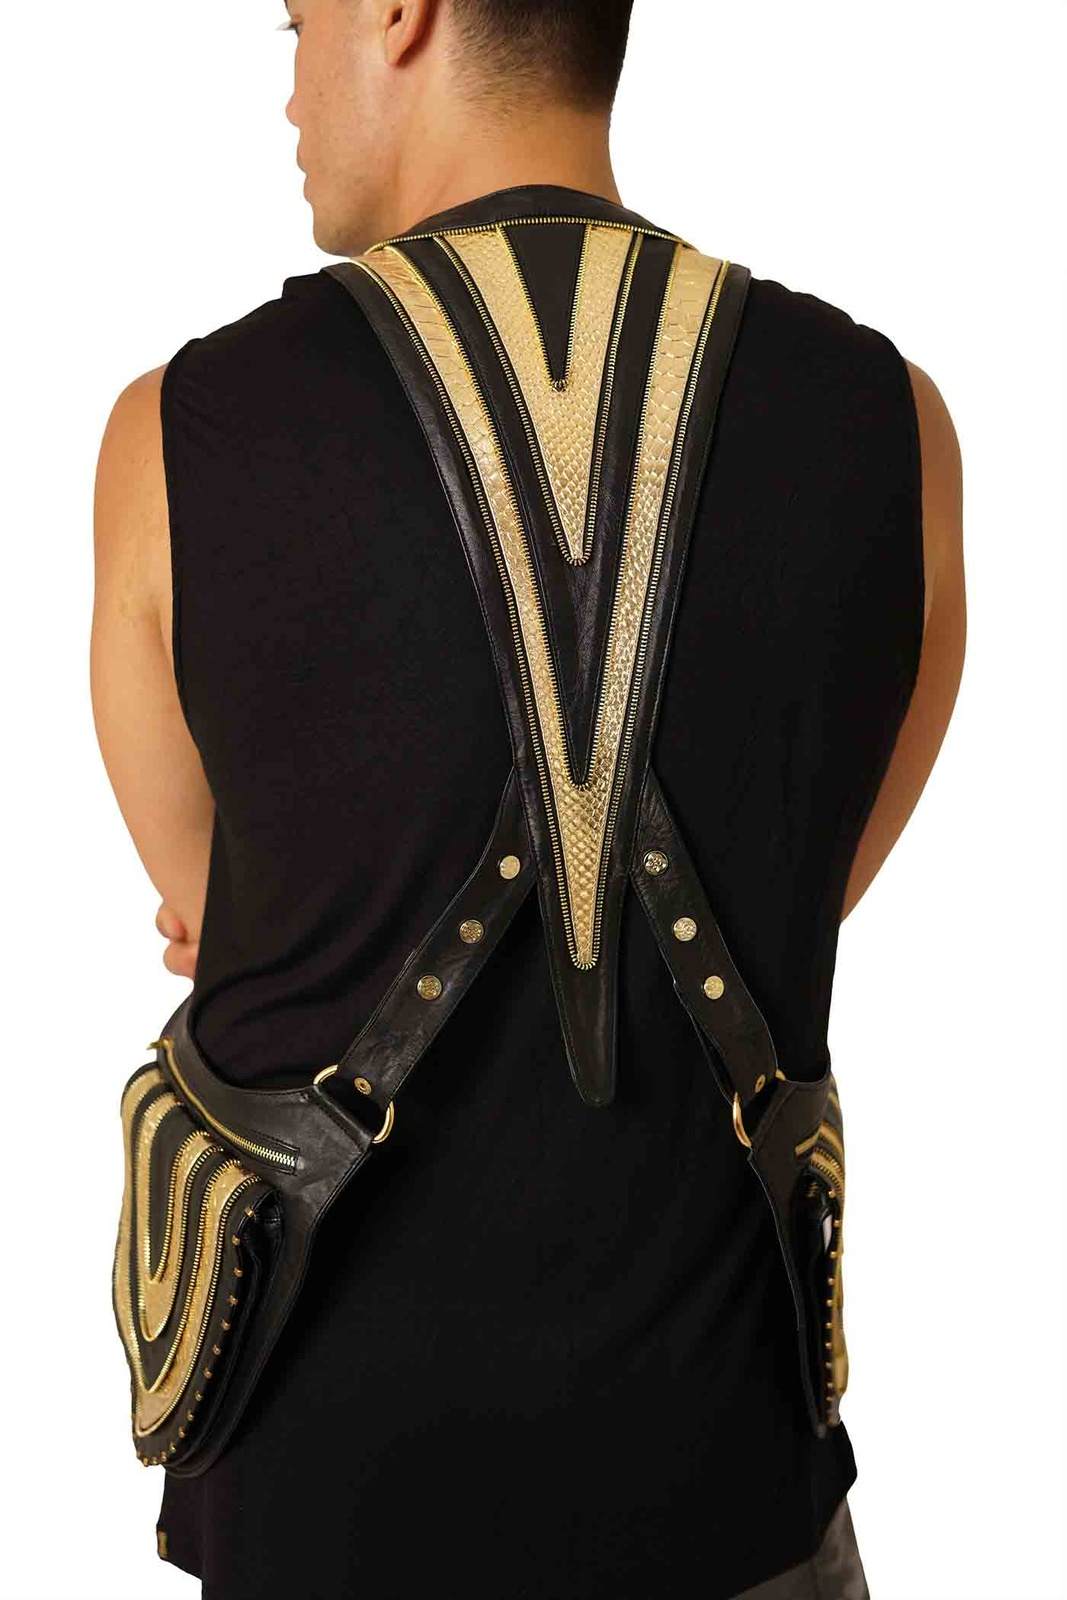 black and gold leather shoulder holster bags from Love Khaos